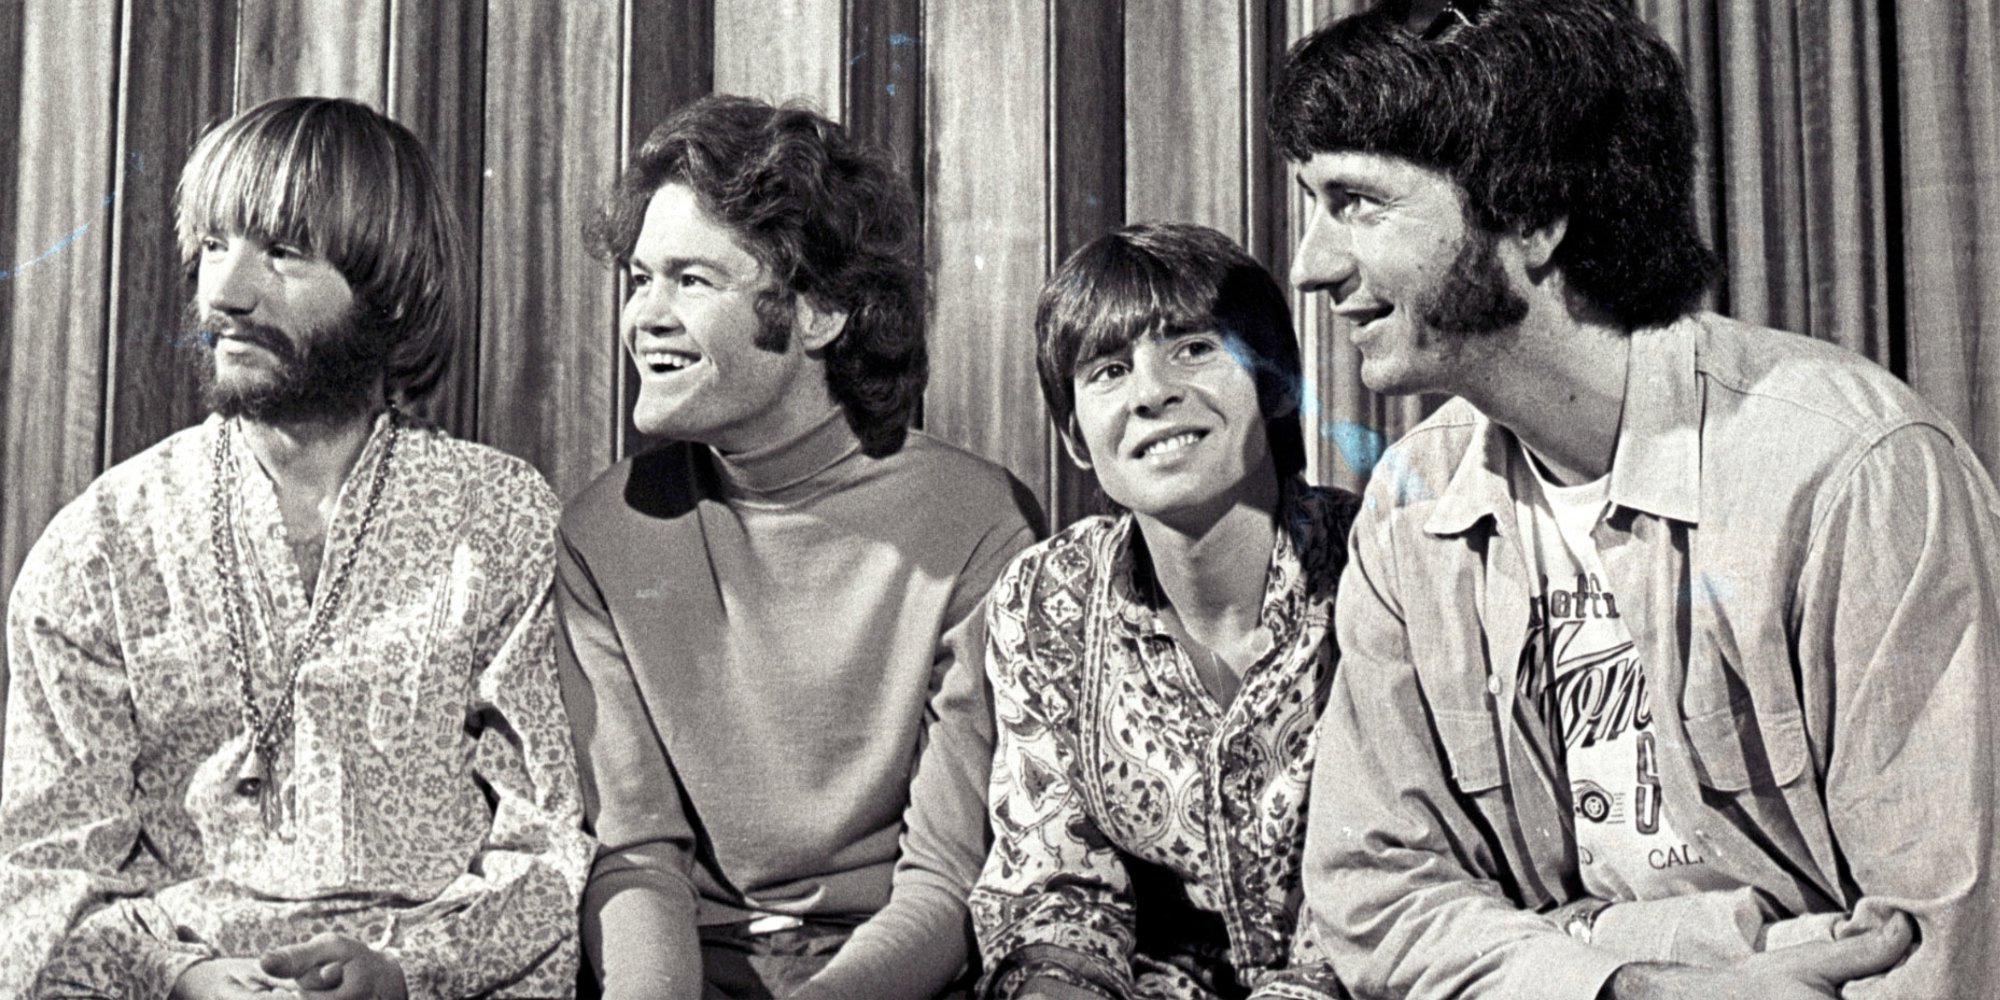 Peter Tork, Micky Dolenz, Davy Jones and Mike Nesmith at a press conference in 1968.